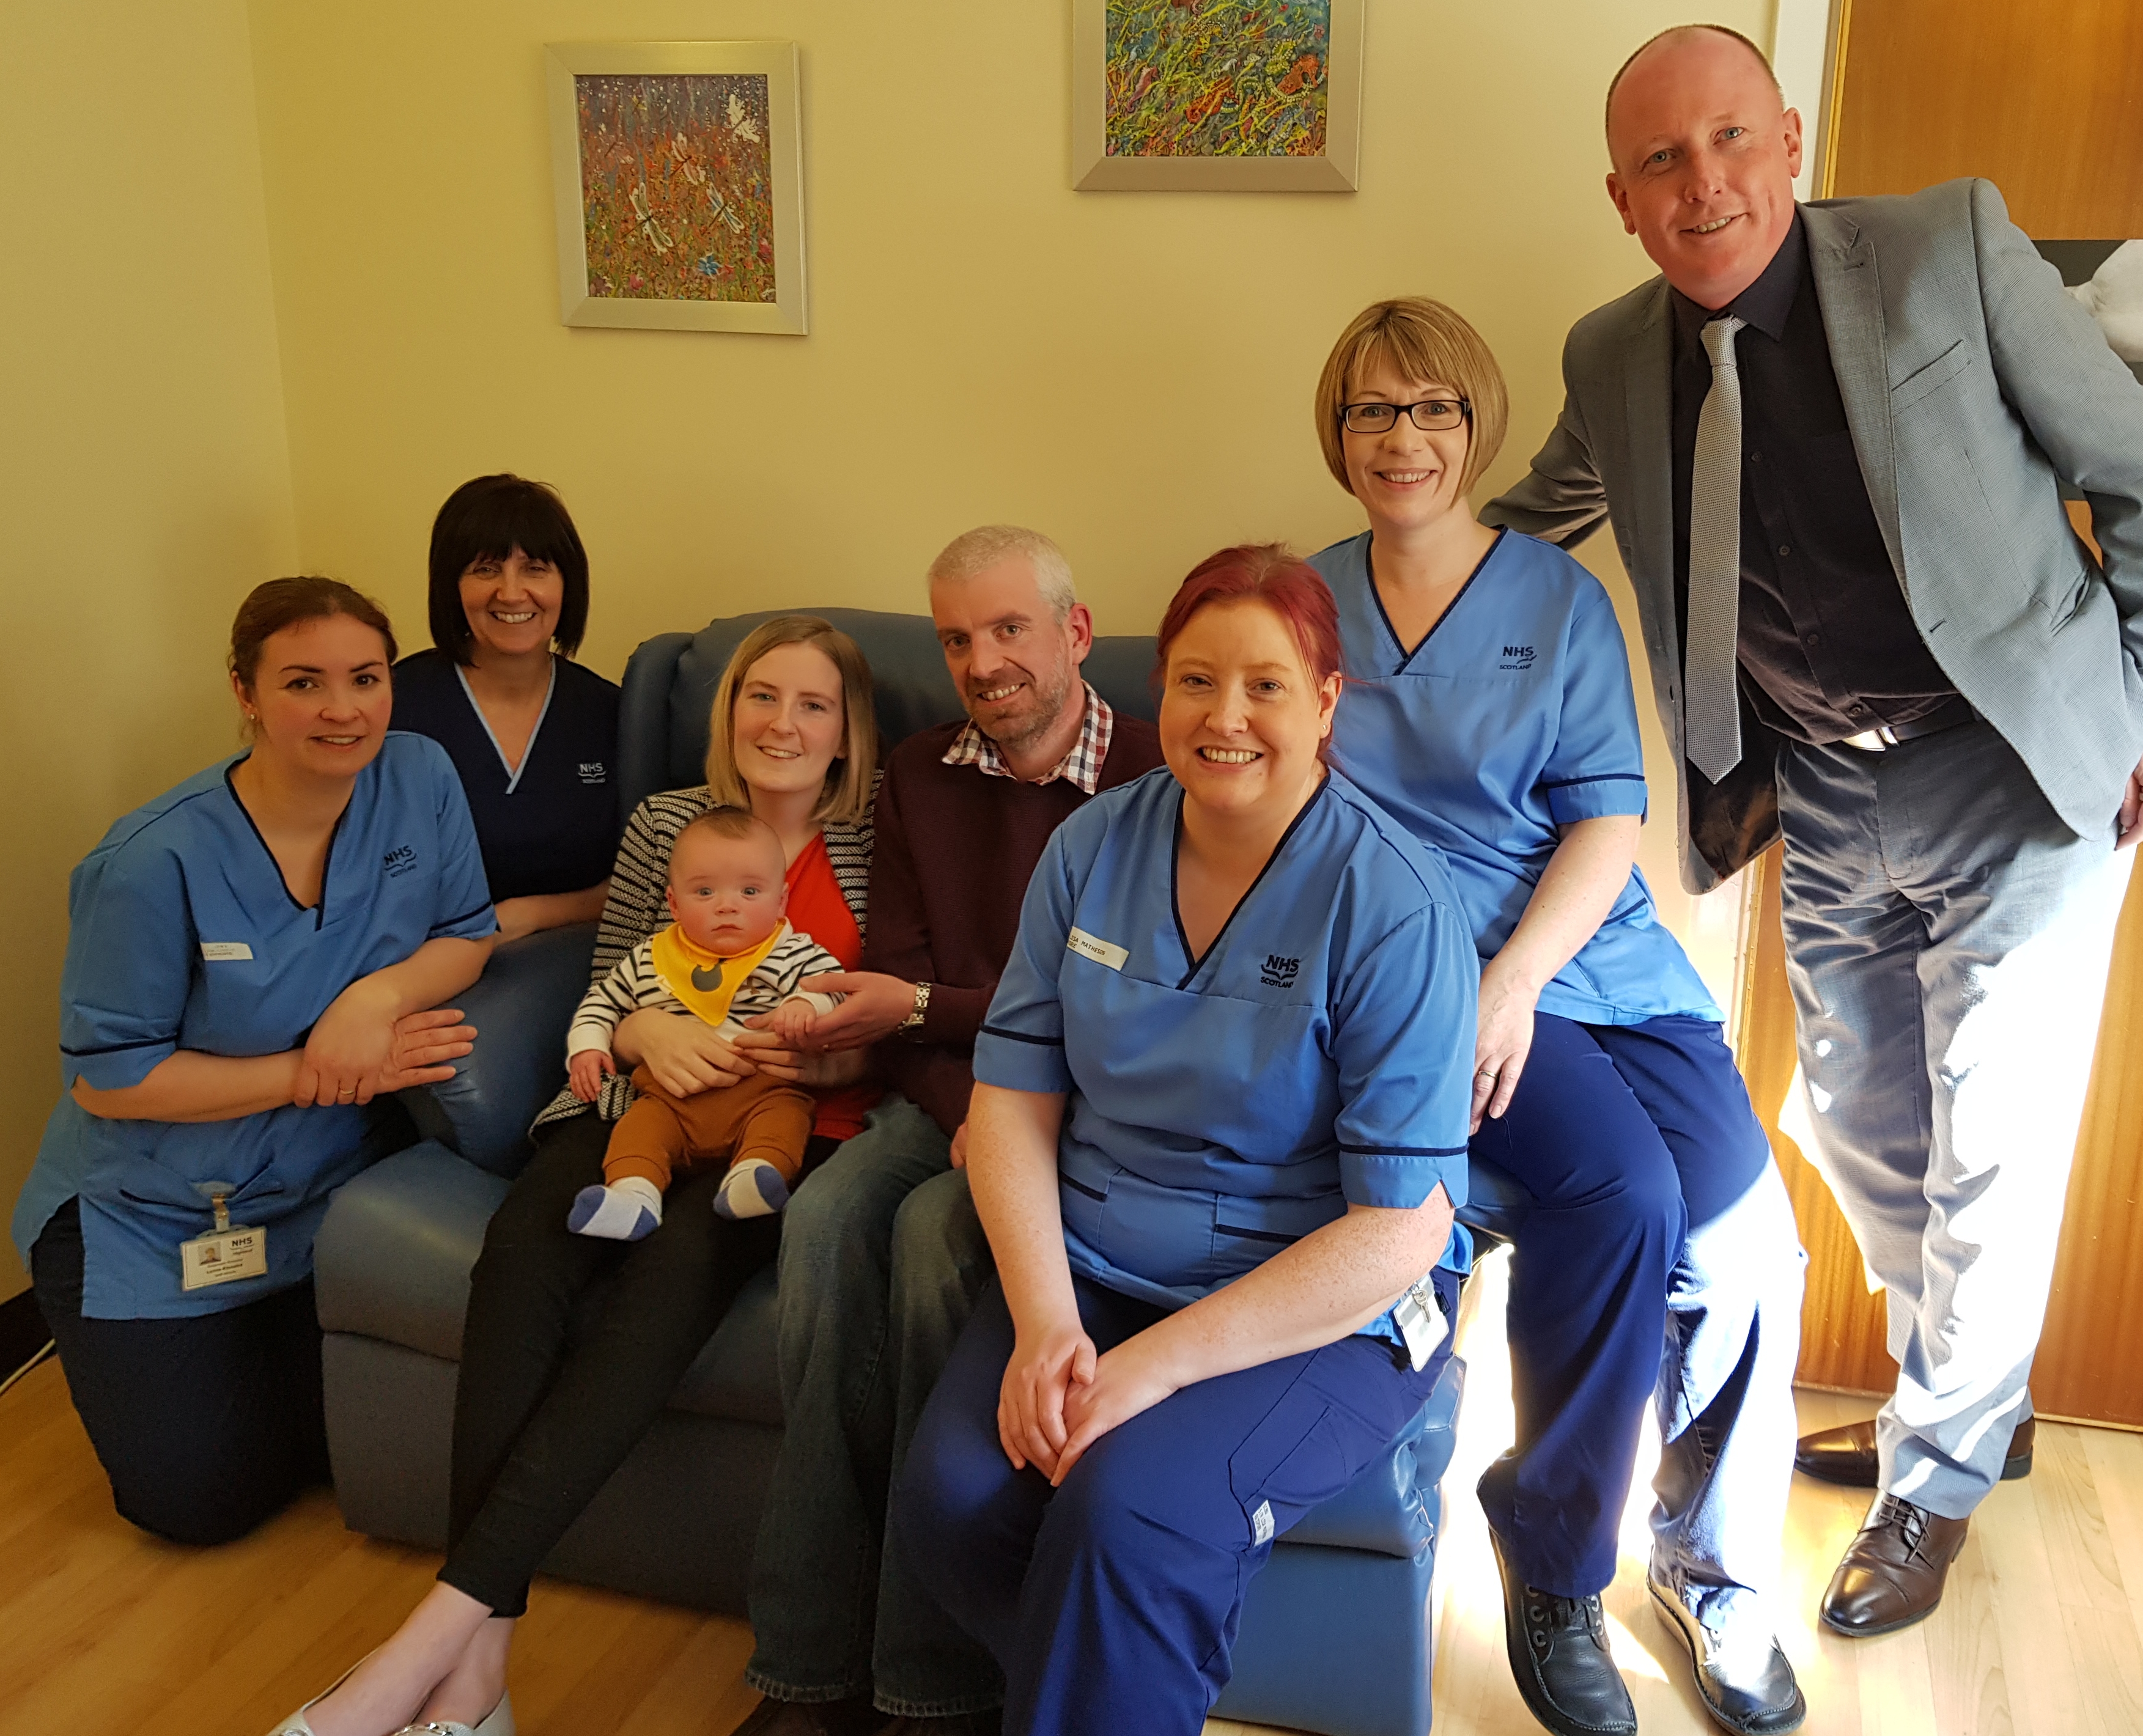 Robert and Hannah Toohill returned to SCBU with their seven month old son Fraser to thank staff for their "amazing" care in the weeks following his birth.